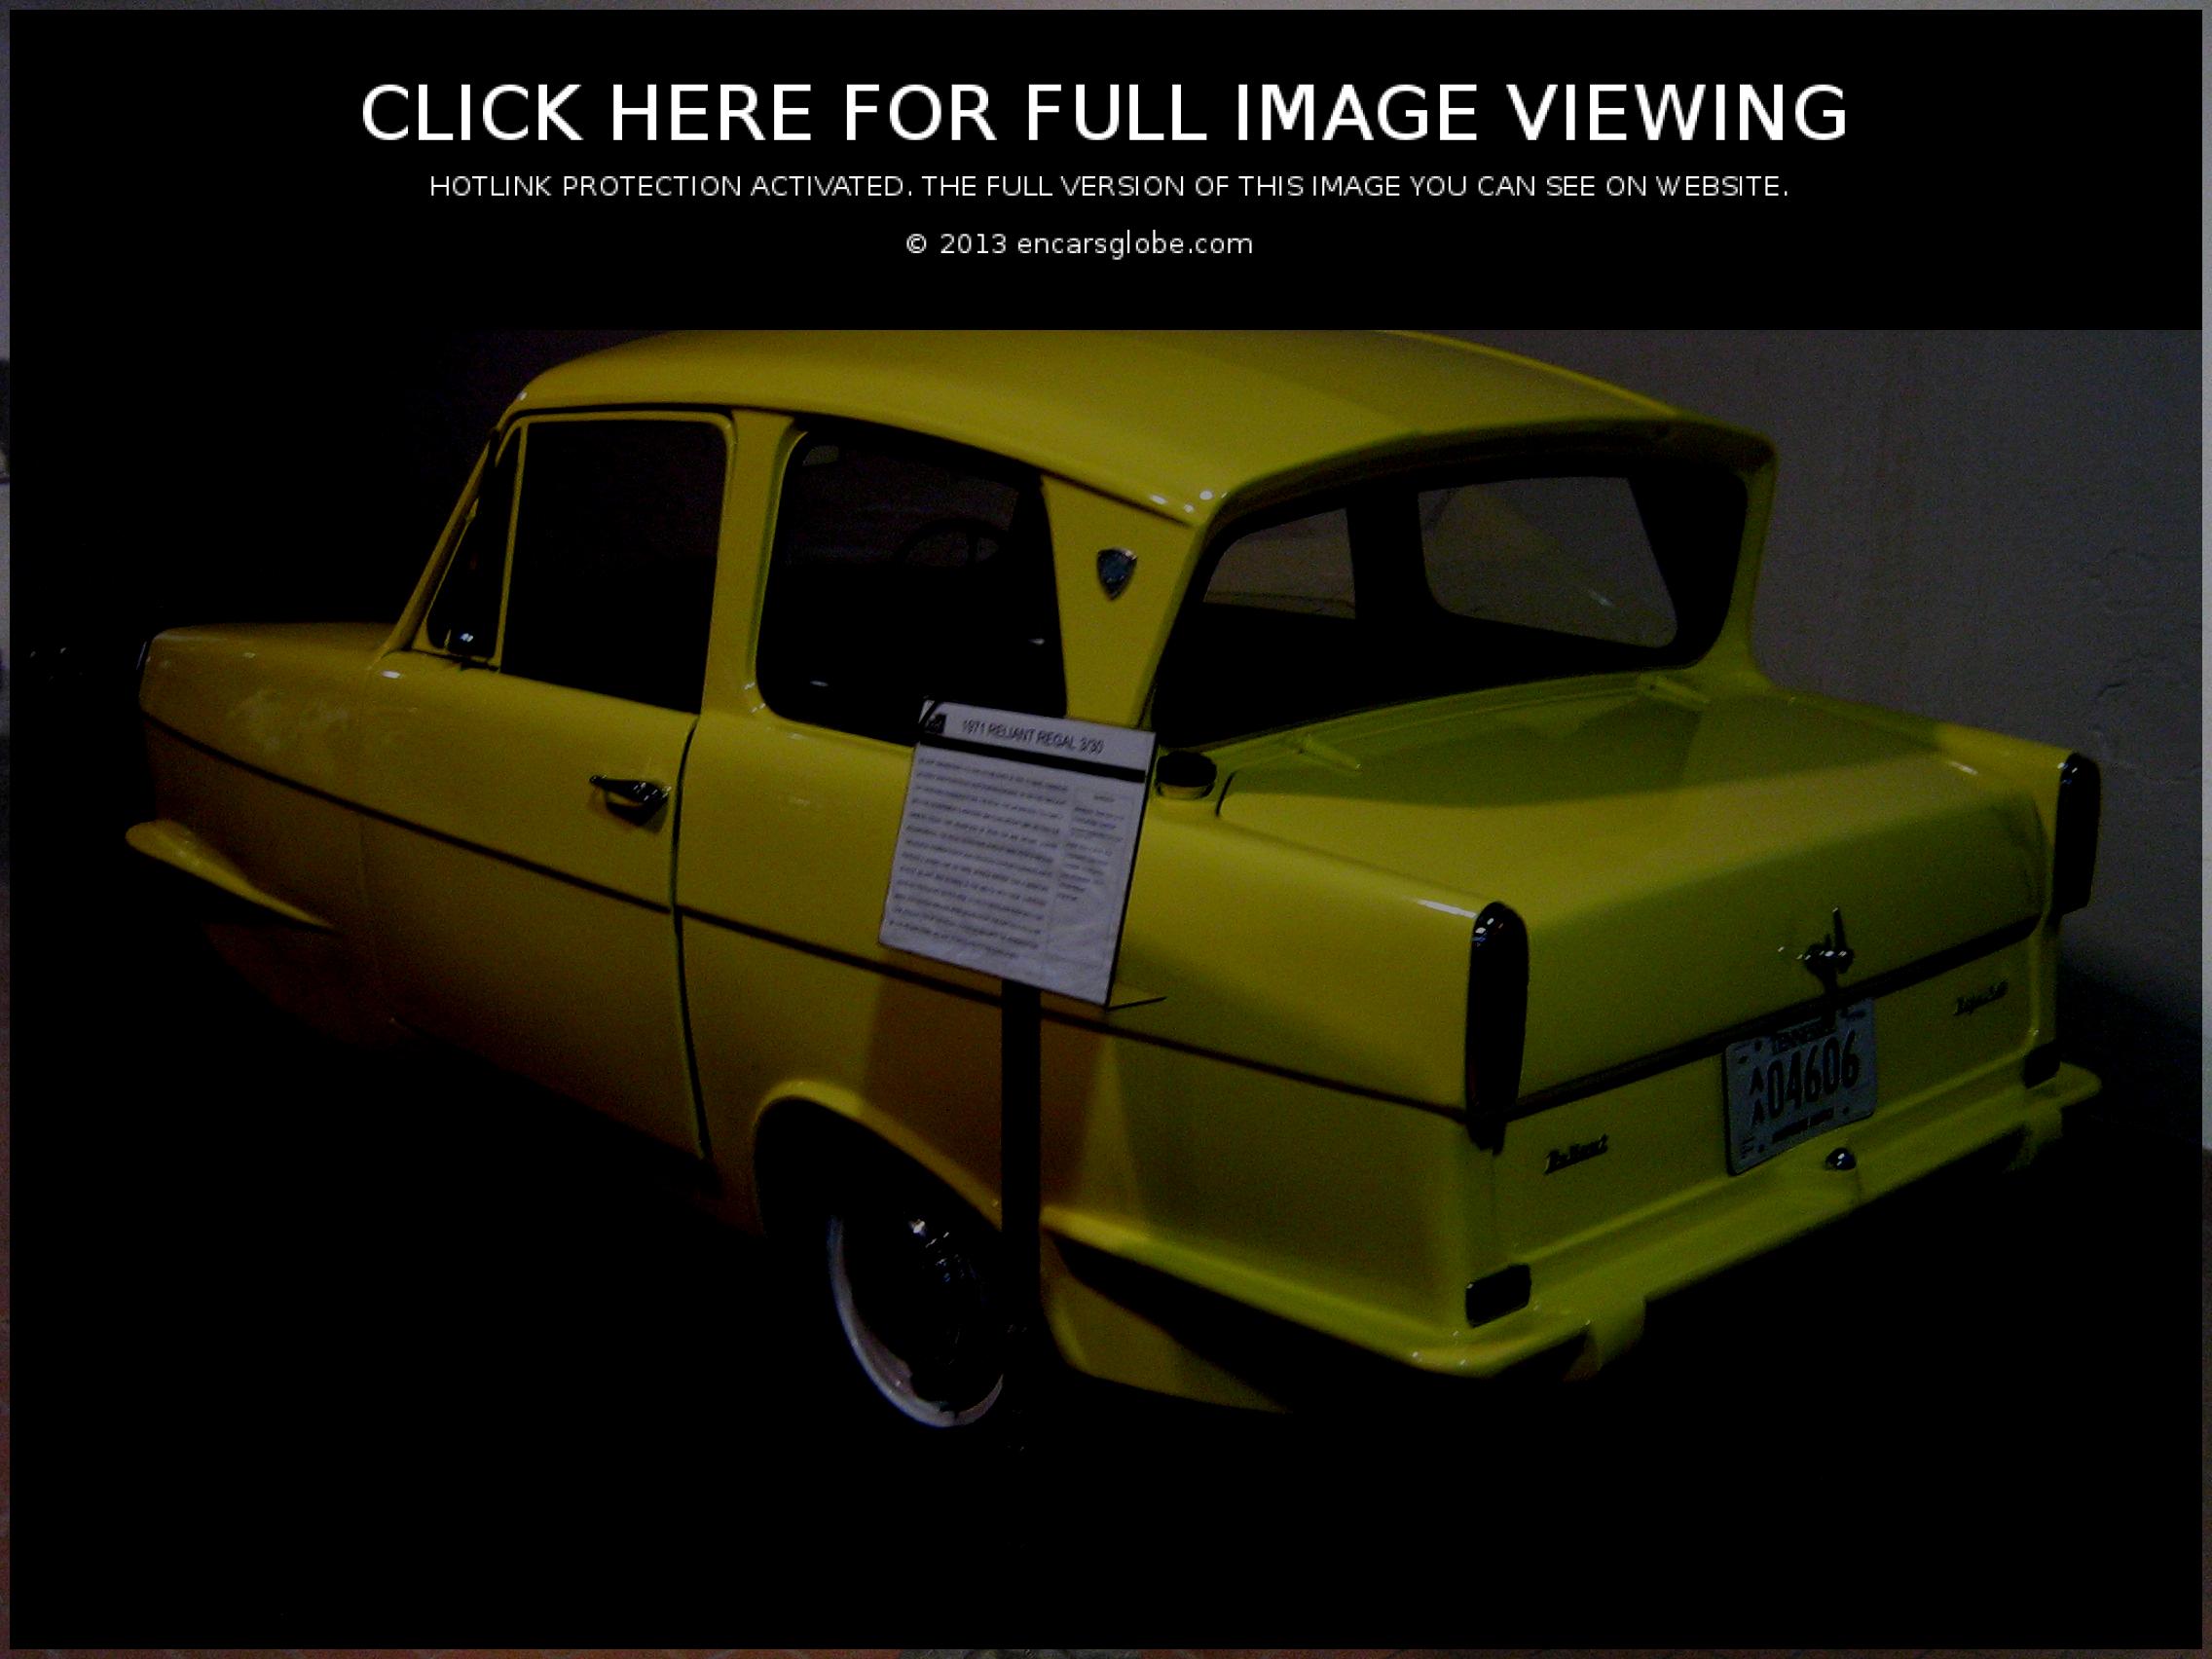 Reliant Regal 3/30 Photo Gallery: Photo #04 out of 11, Image Size ...